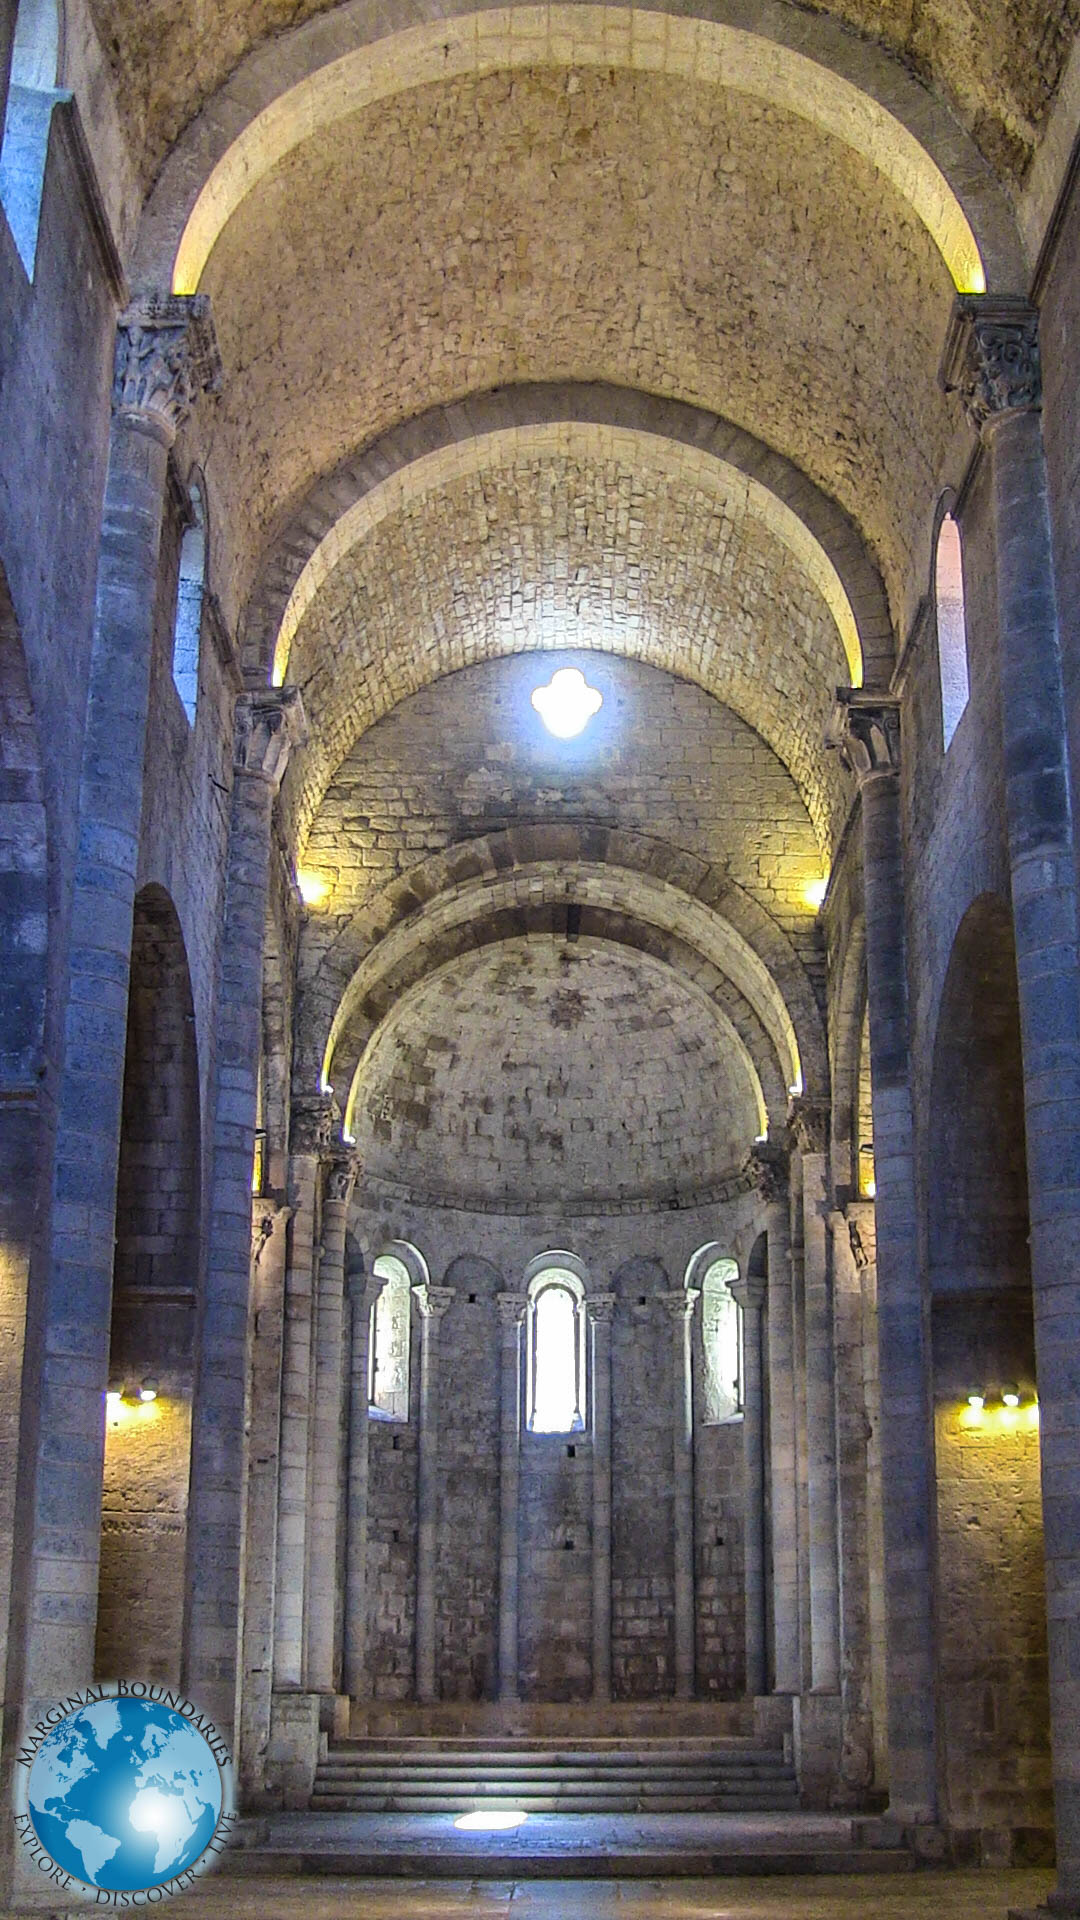 The entry to the Monastery of Sant Pere de Galligants